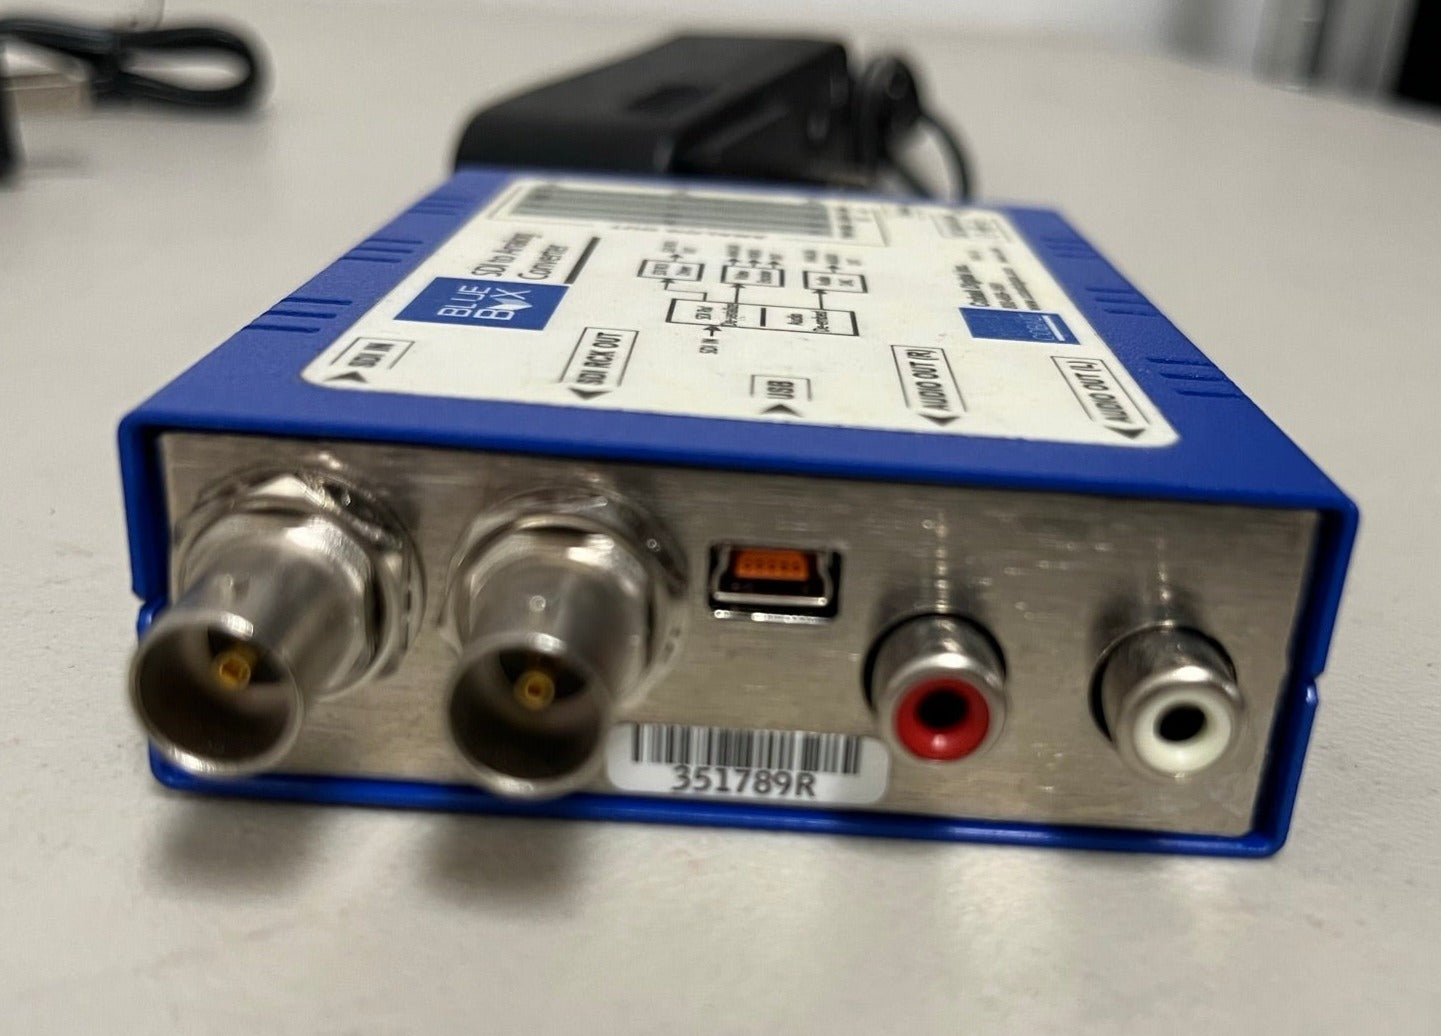 Used Cobalt Blue Box SDI to Analog Converter, We Sell Professional Audio Equipment. Audio Systems, Amplifiers, Consoles, Mixers, Electronics, Entertainment, Sound, Live. 